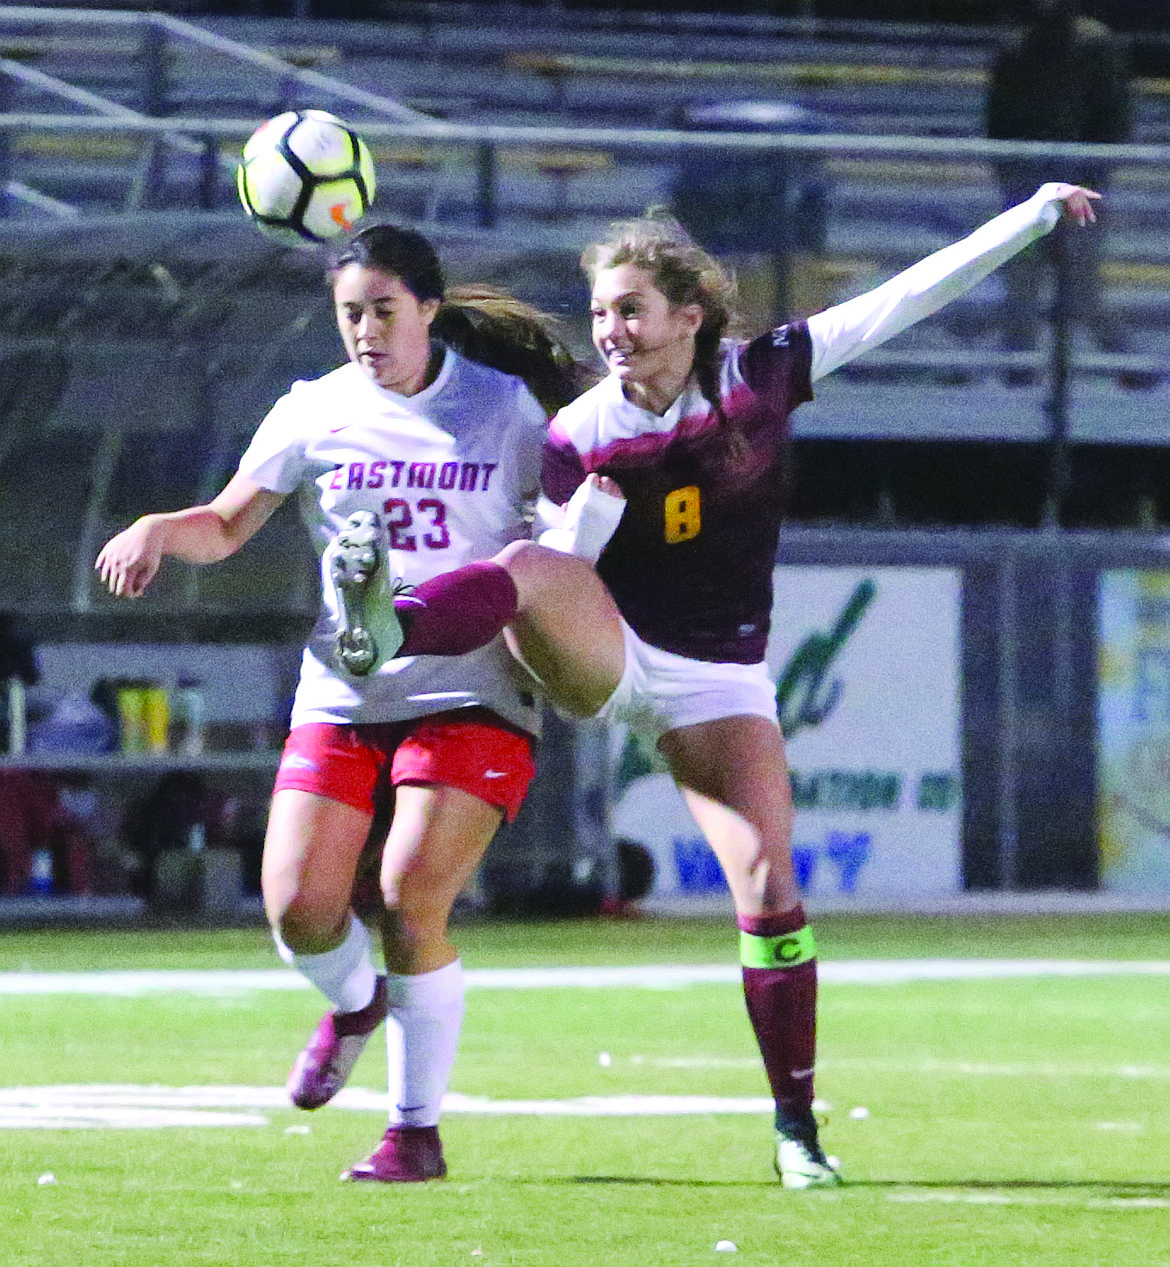 Connor Vanderweyst/Columbia Basin Herald
Moses Lake defender Taya Rogers (8) makes a play for the ball against Eastmont's midfielder Maria Mendoza.